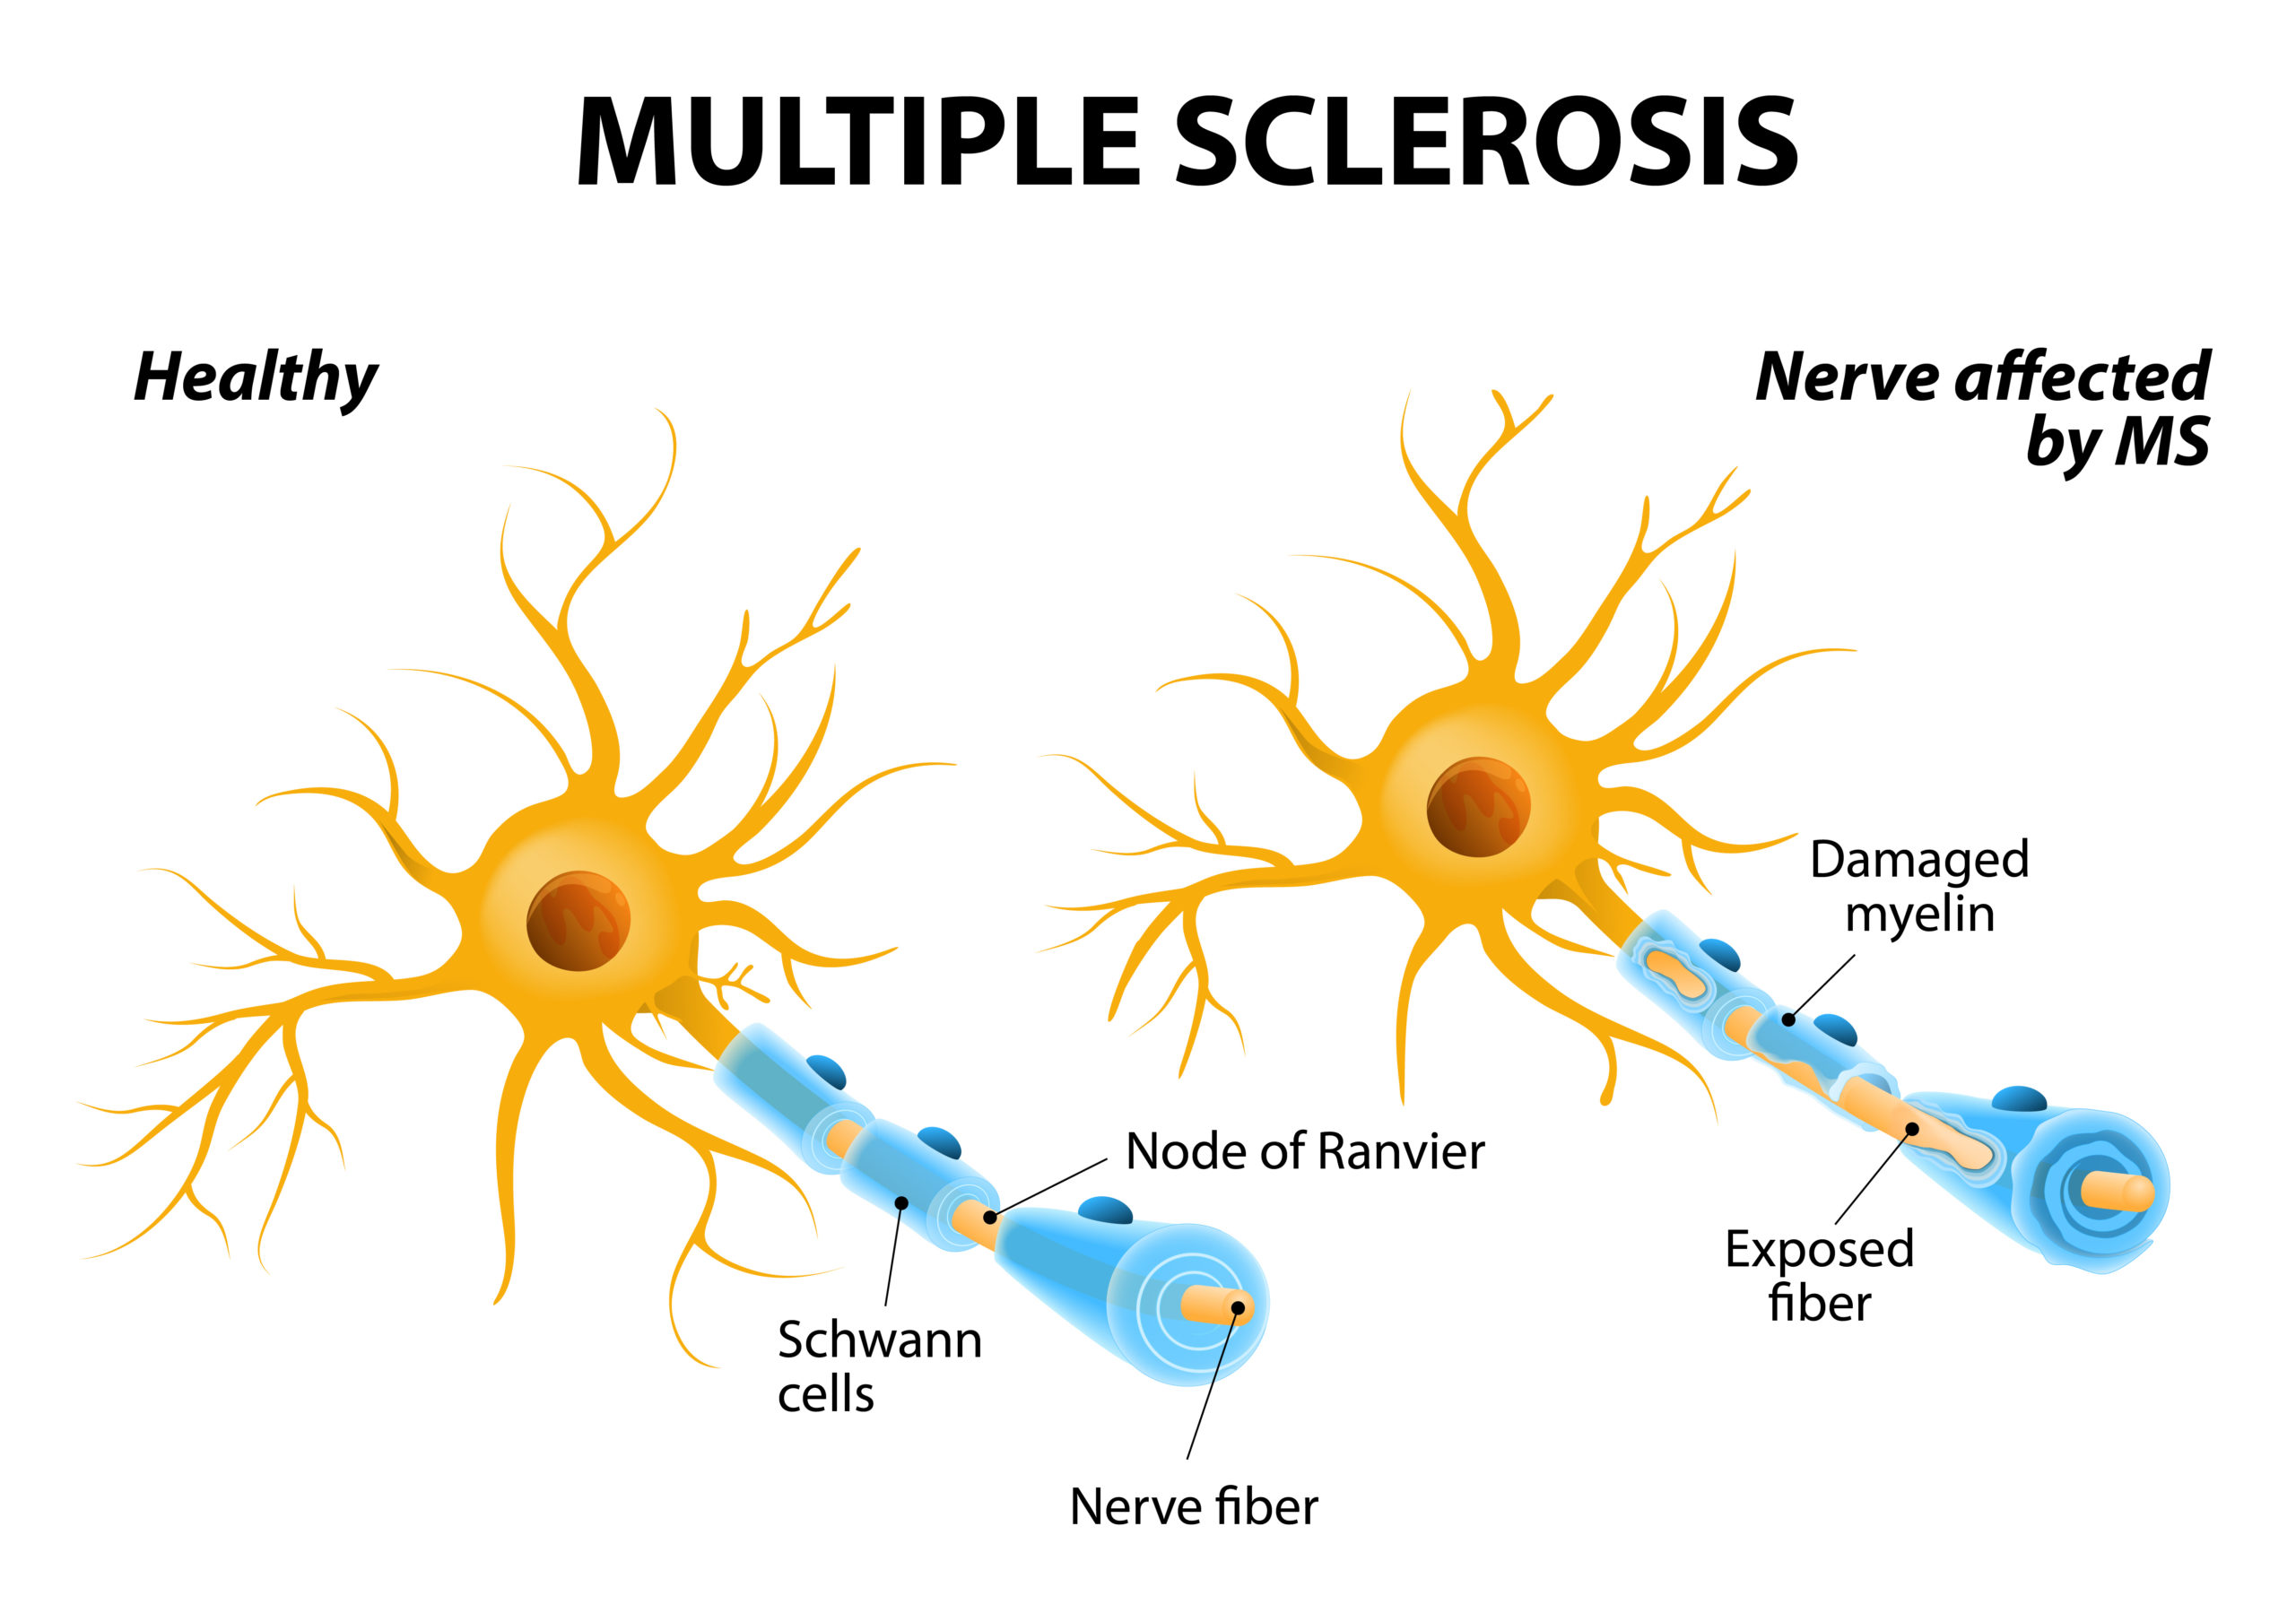 most common presentation of multiple sclerosis